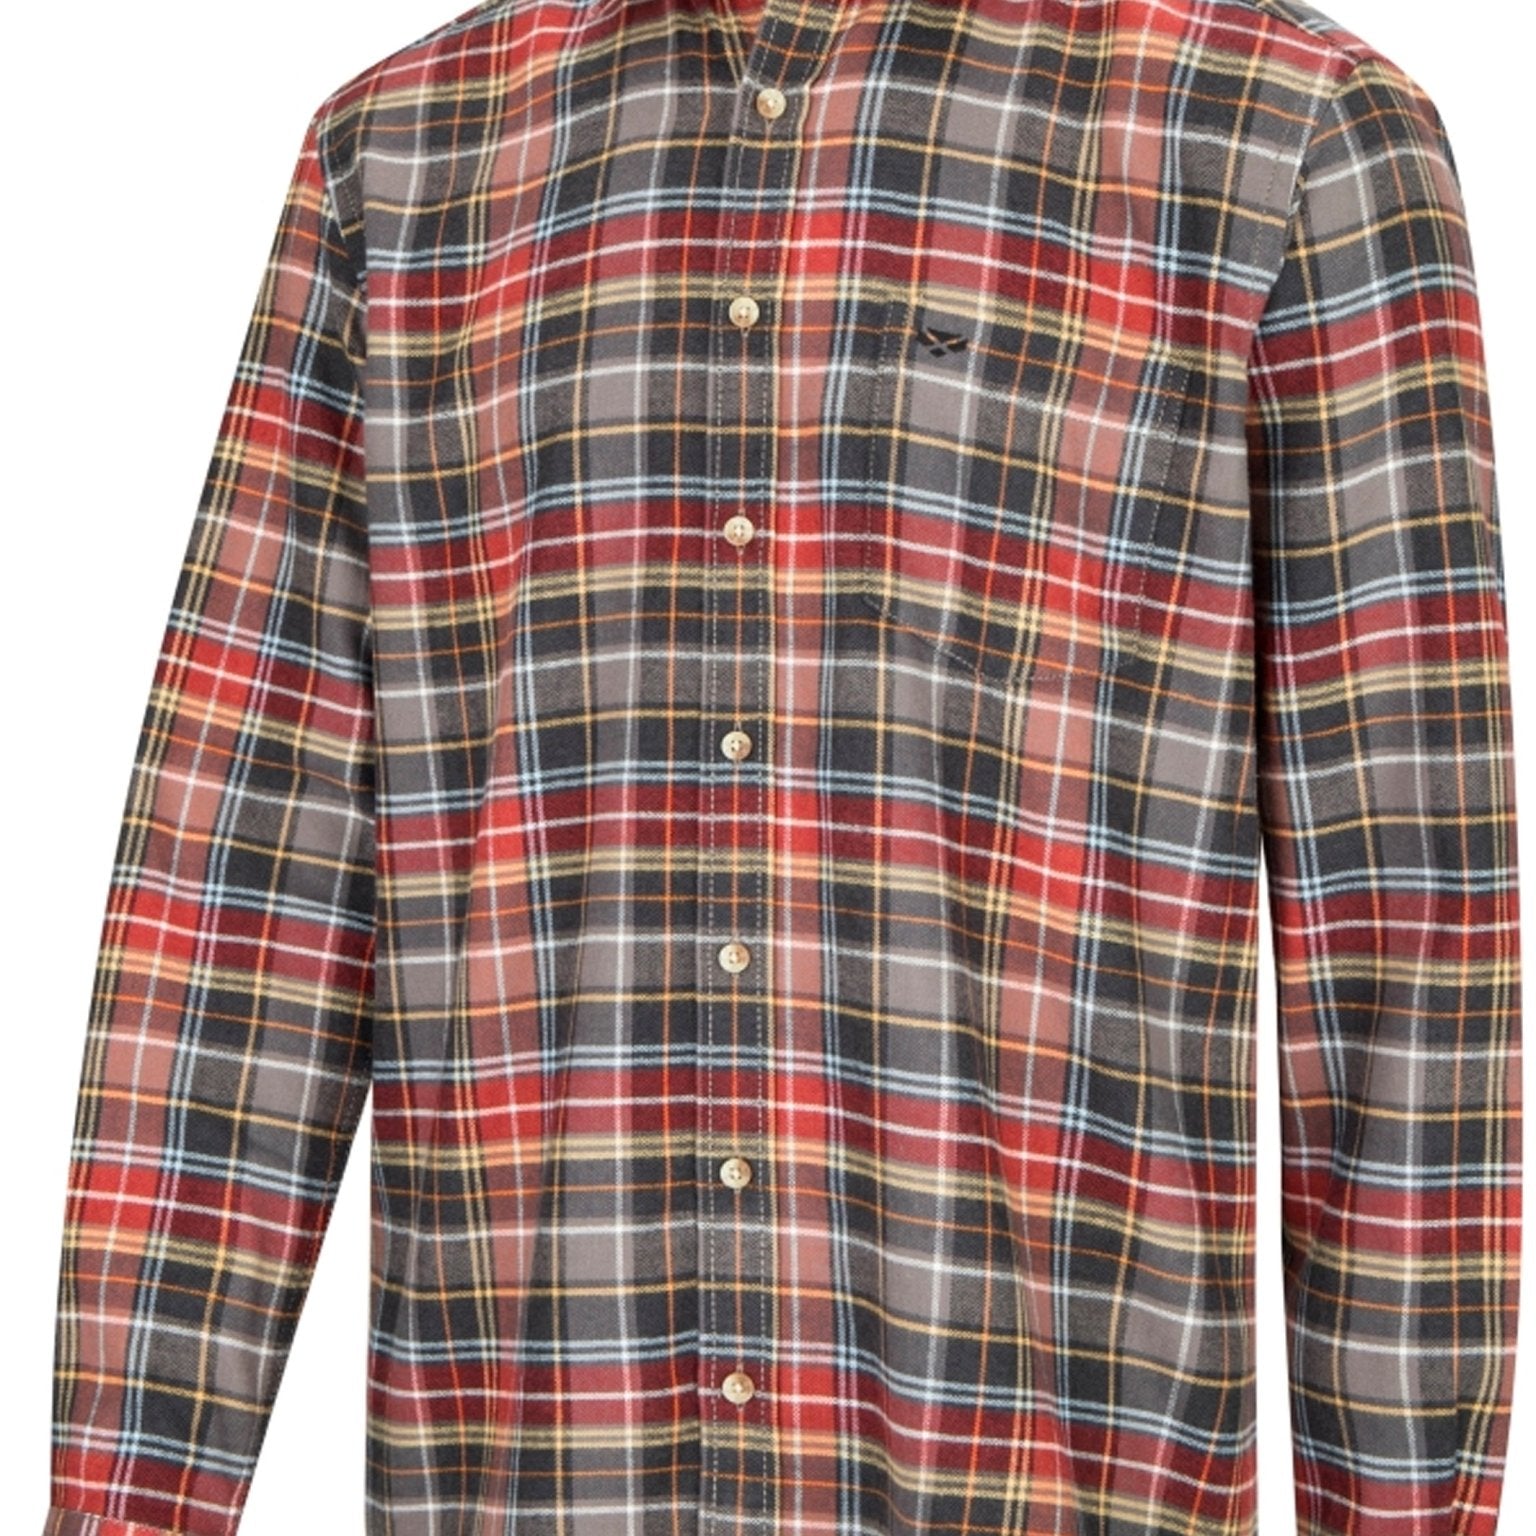 4elementsclothingHoggs of FifeHoggs of Fife - Pitlochry Mens Flannel Check ShirtShirtPITL/BC/1